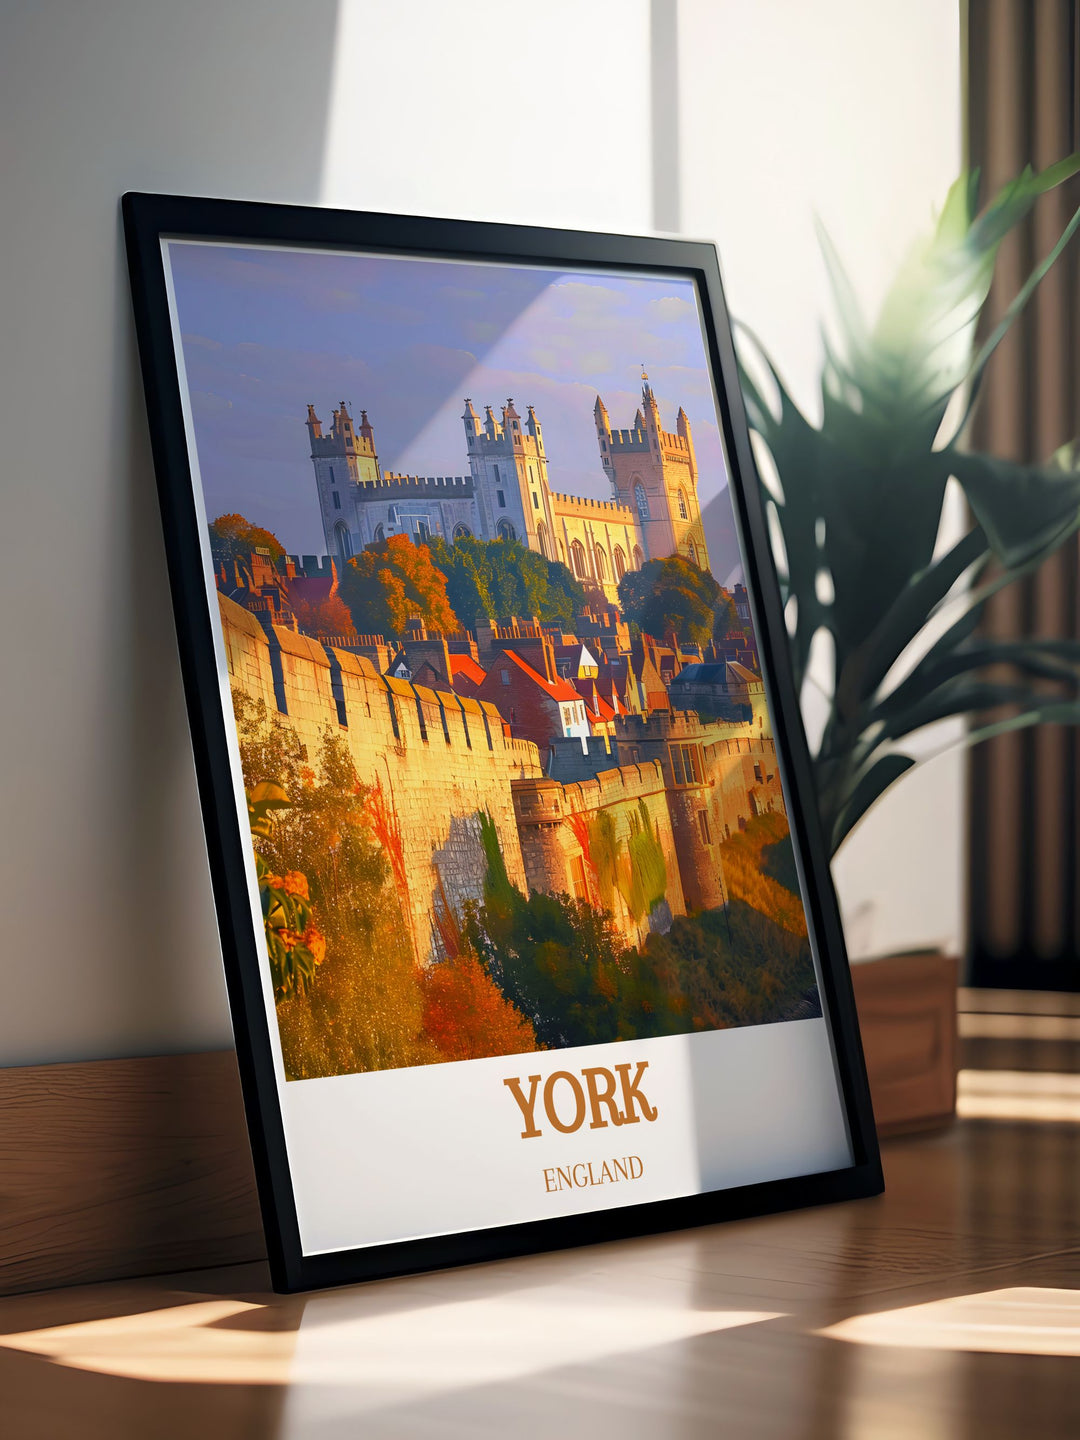 Yorkshire Poster featuring the Howard Mausoleum and Howard Castle in the Howardian Hills AONB. Ideal for home decor with a historical twist. Includes ENGLAND, york city walls for added cultural depth.